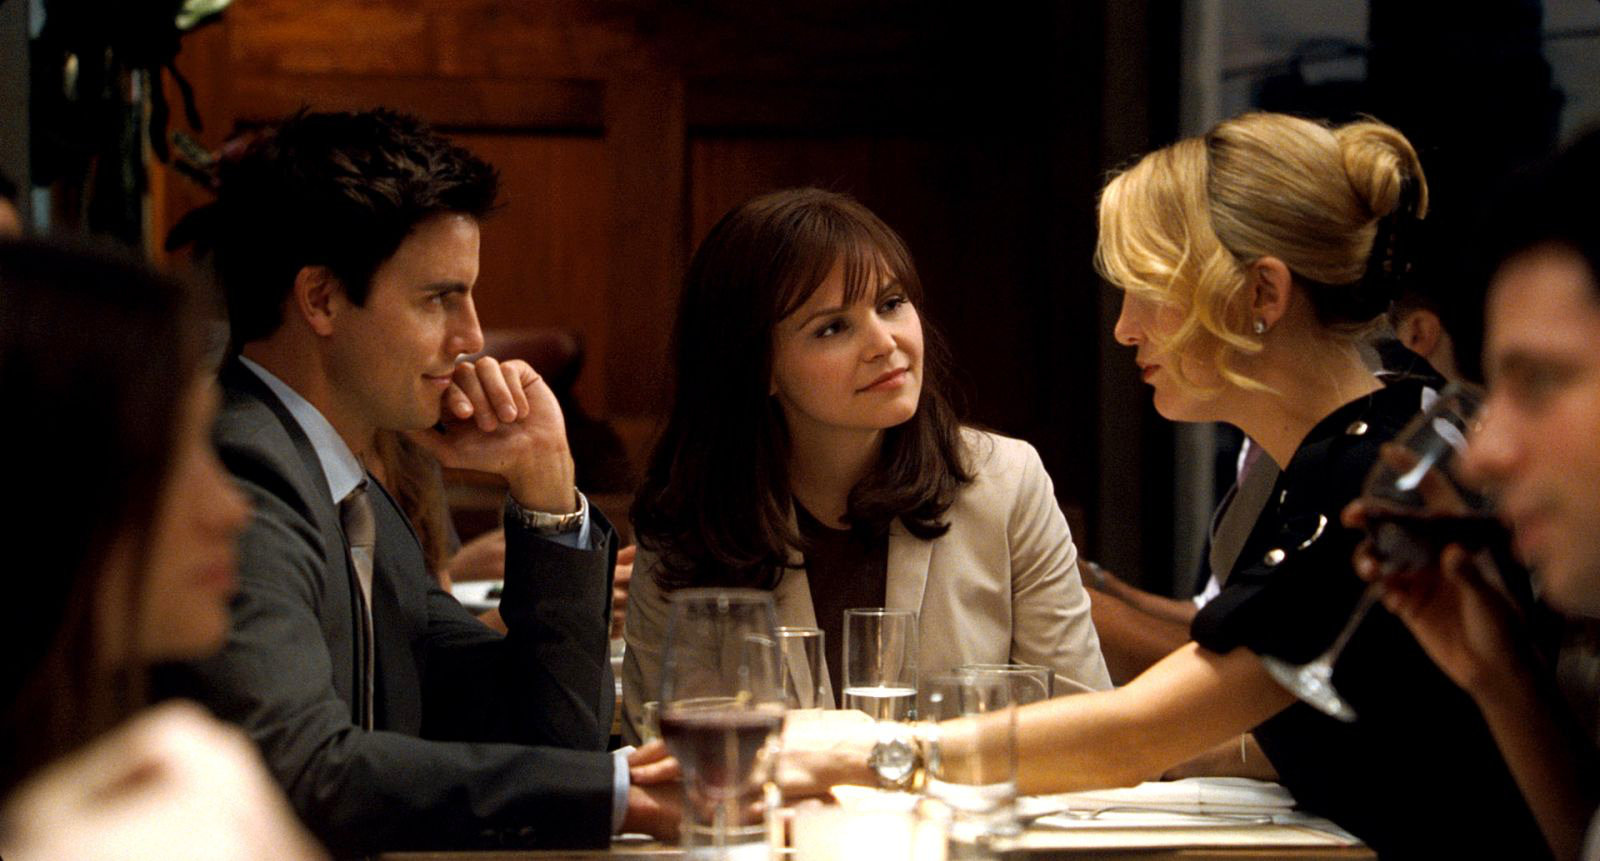 Colin Egglesfield, Ginnifer Goodwin and Kate Hudson in Warner Bros. Pictures' Something Borrowed (2011)